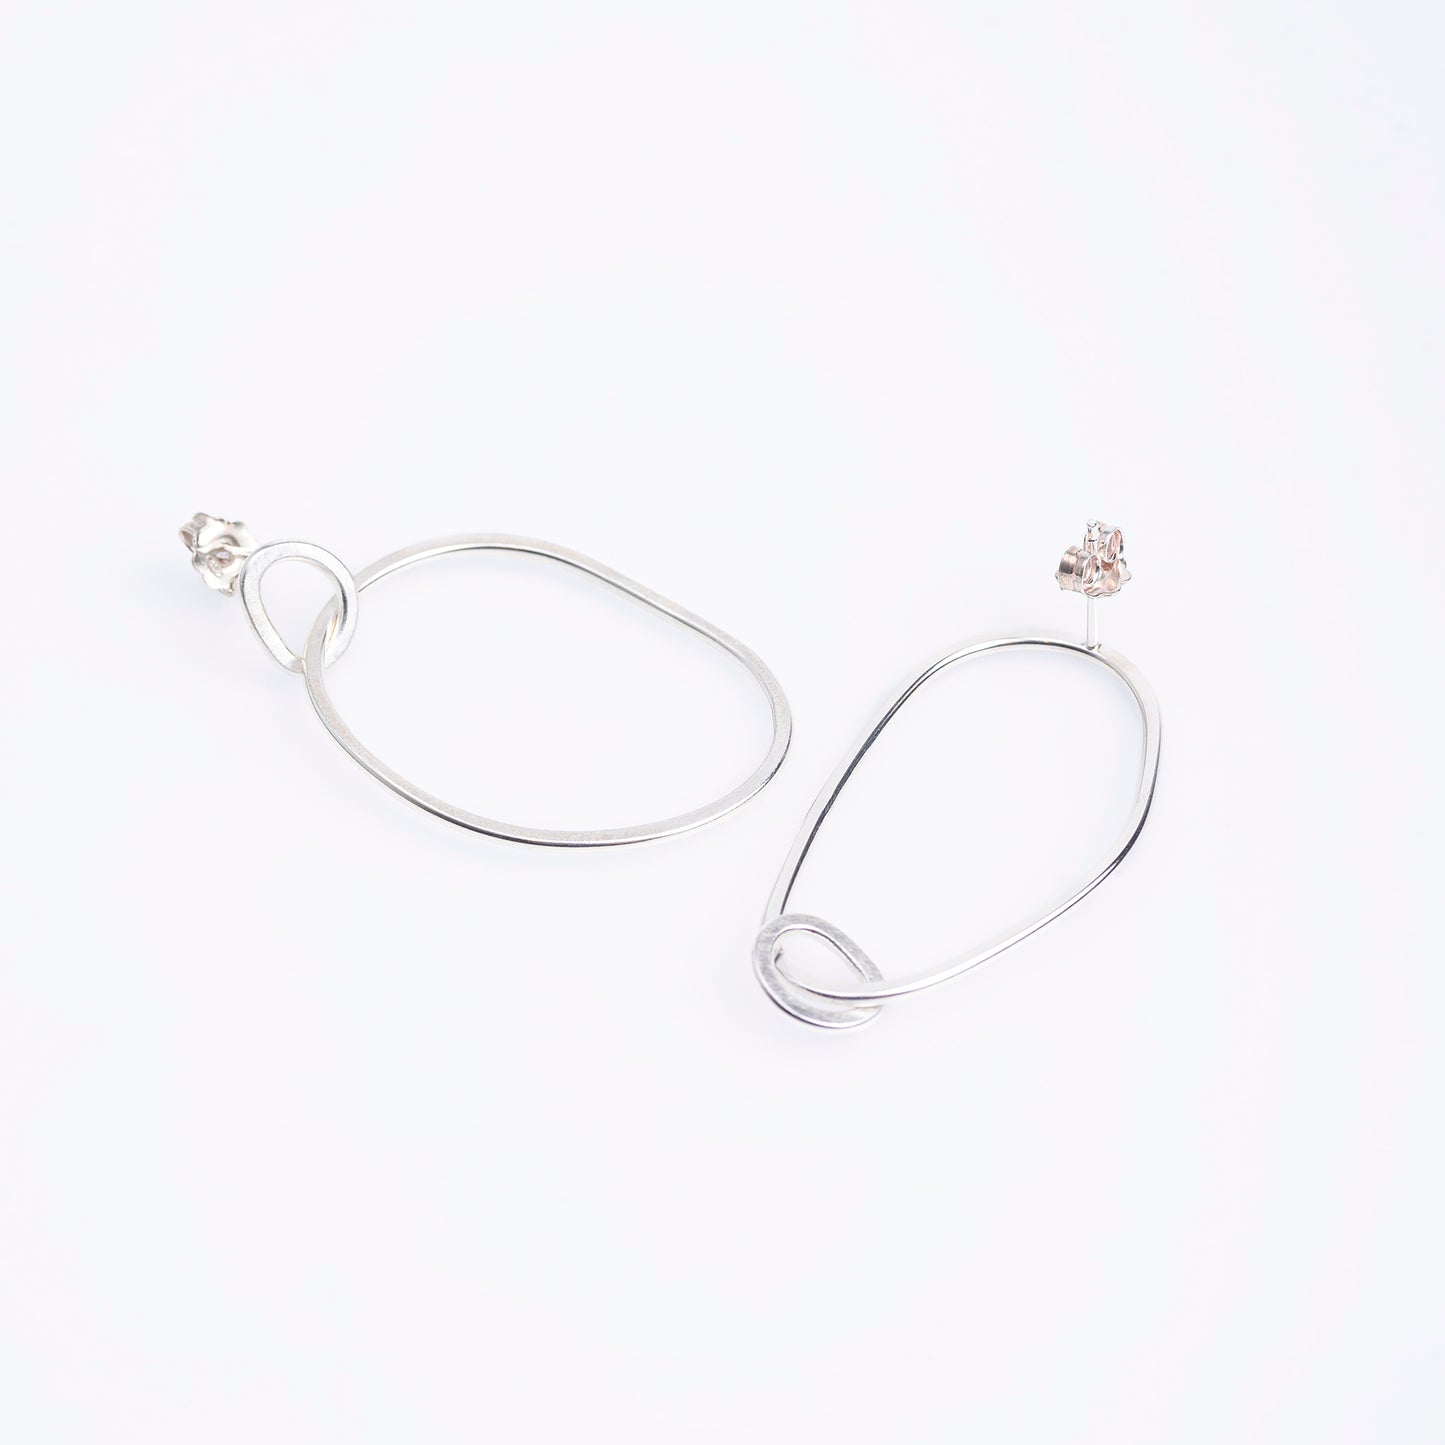 The Perfect Circle Earrings No. 1